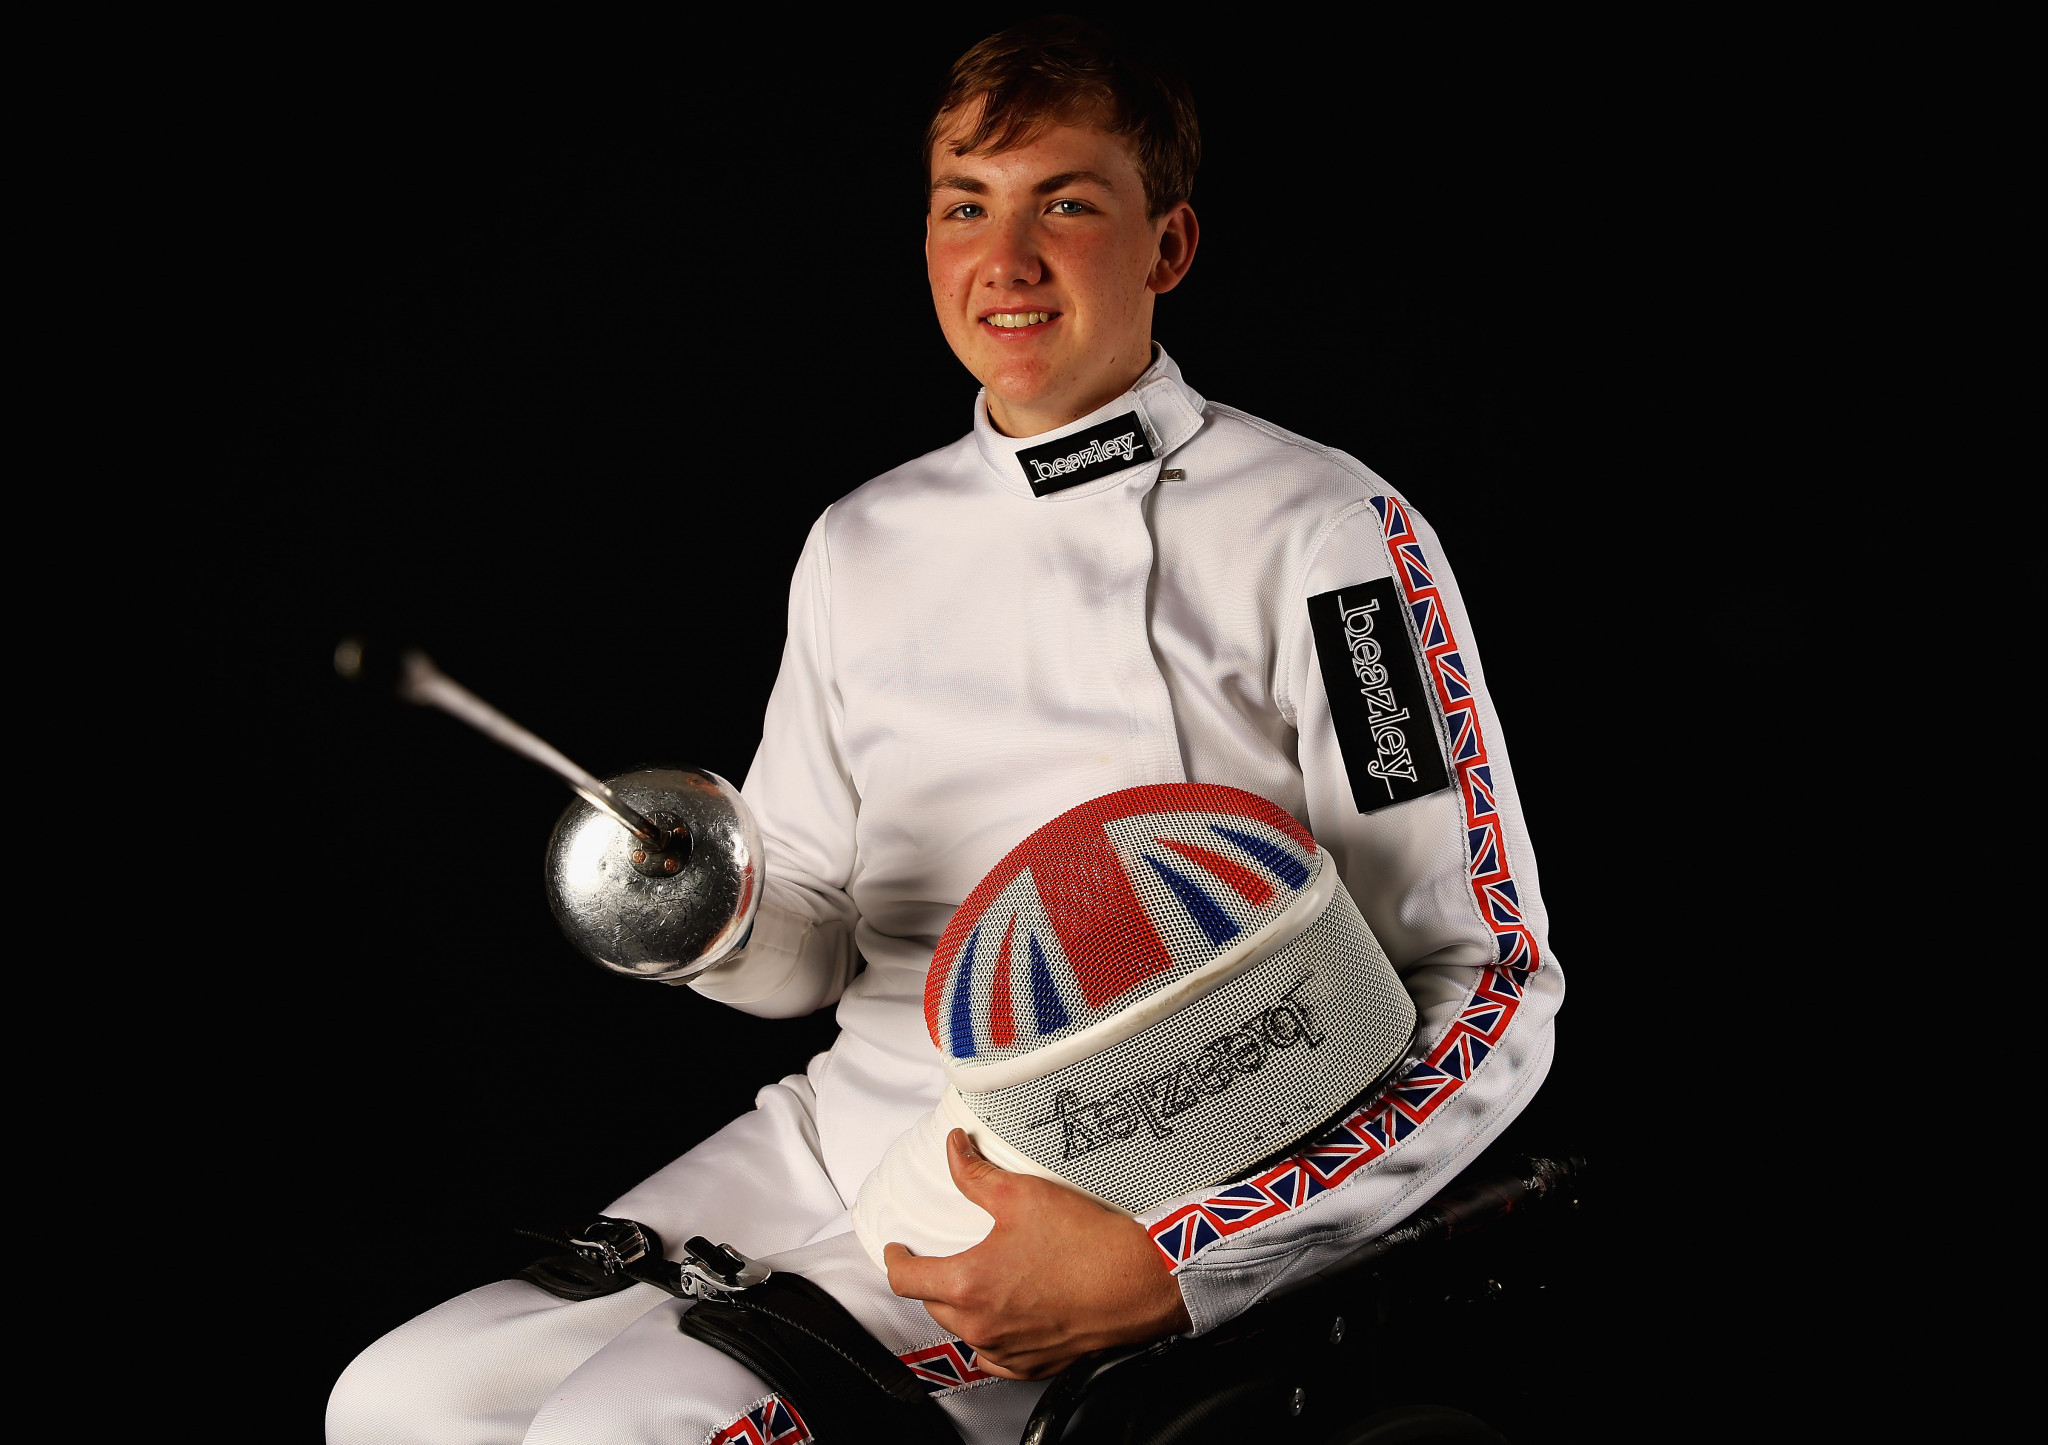 Piers Gilliver is aiming for gold at Tokyo 2020 in the men's épée category A ©Getty images